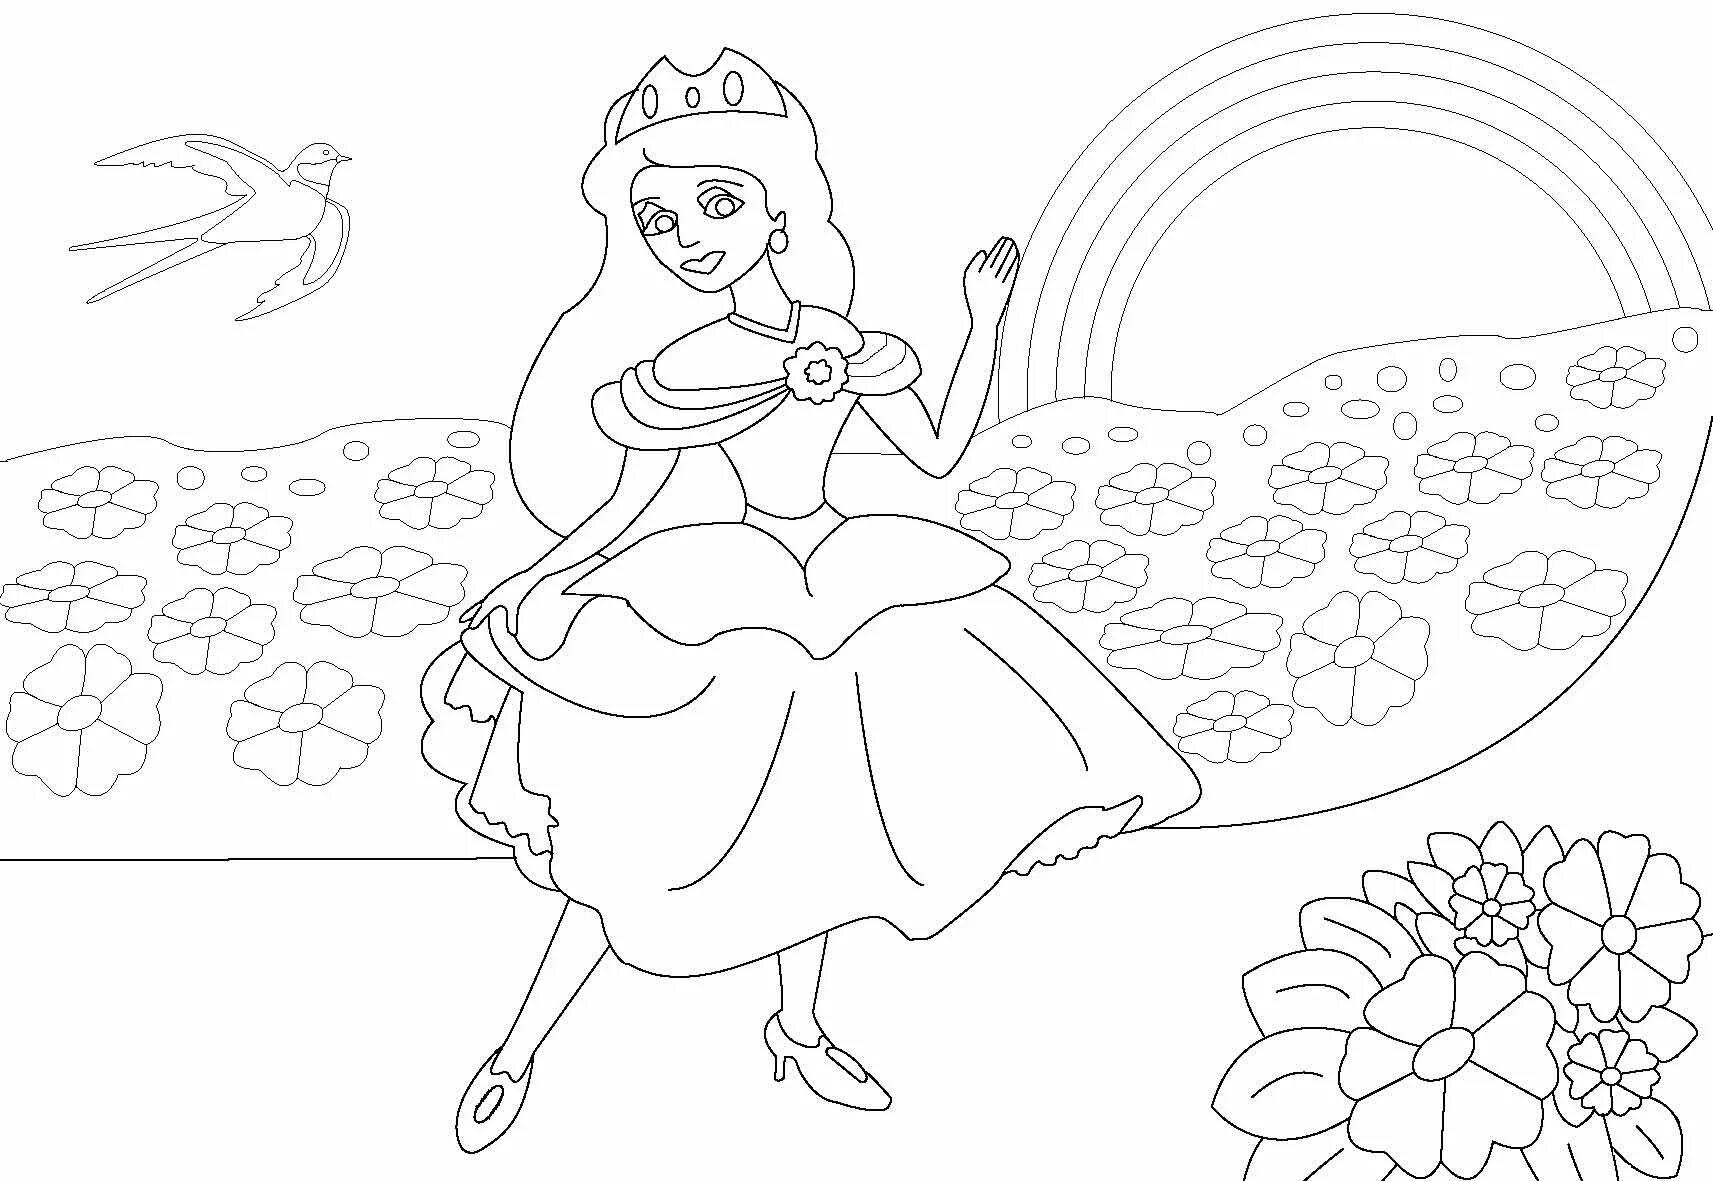 Playful princess coloring for girls 4 years old